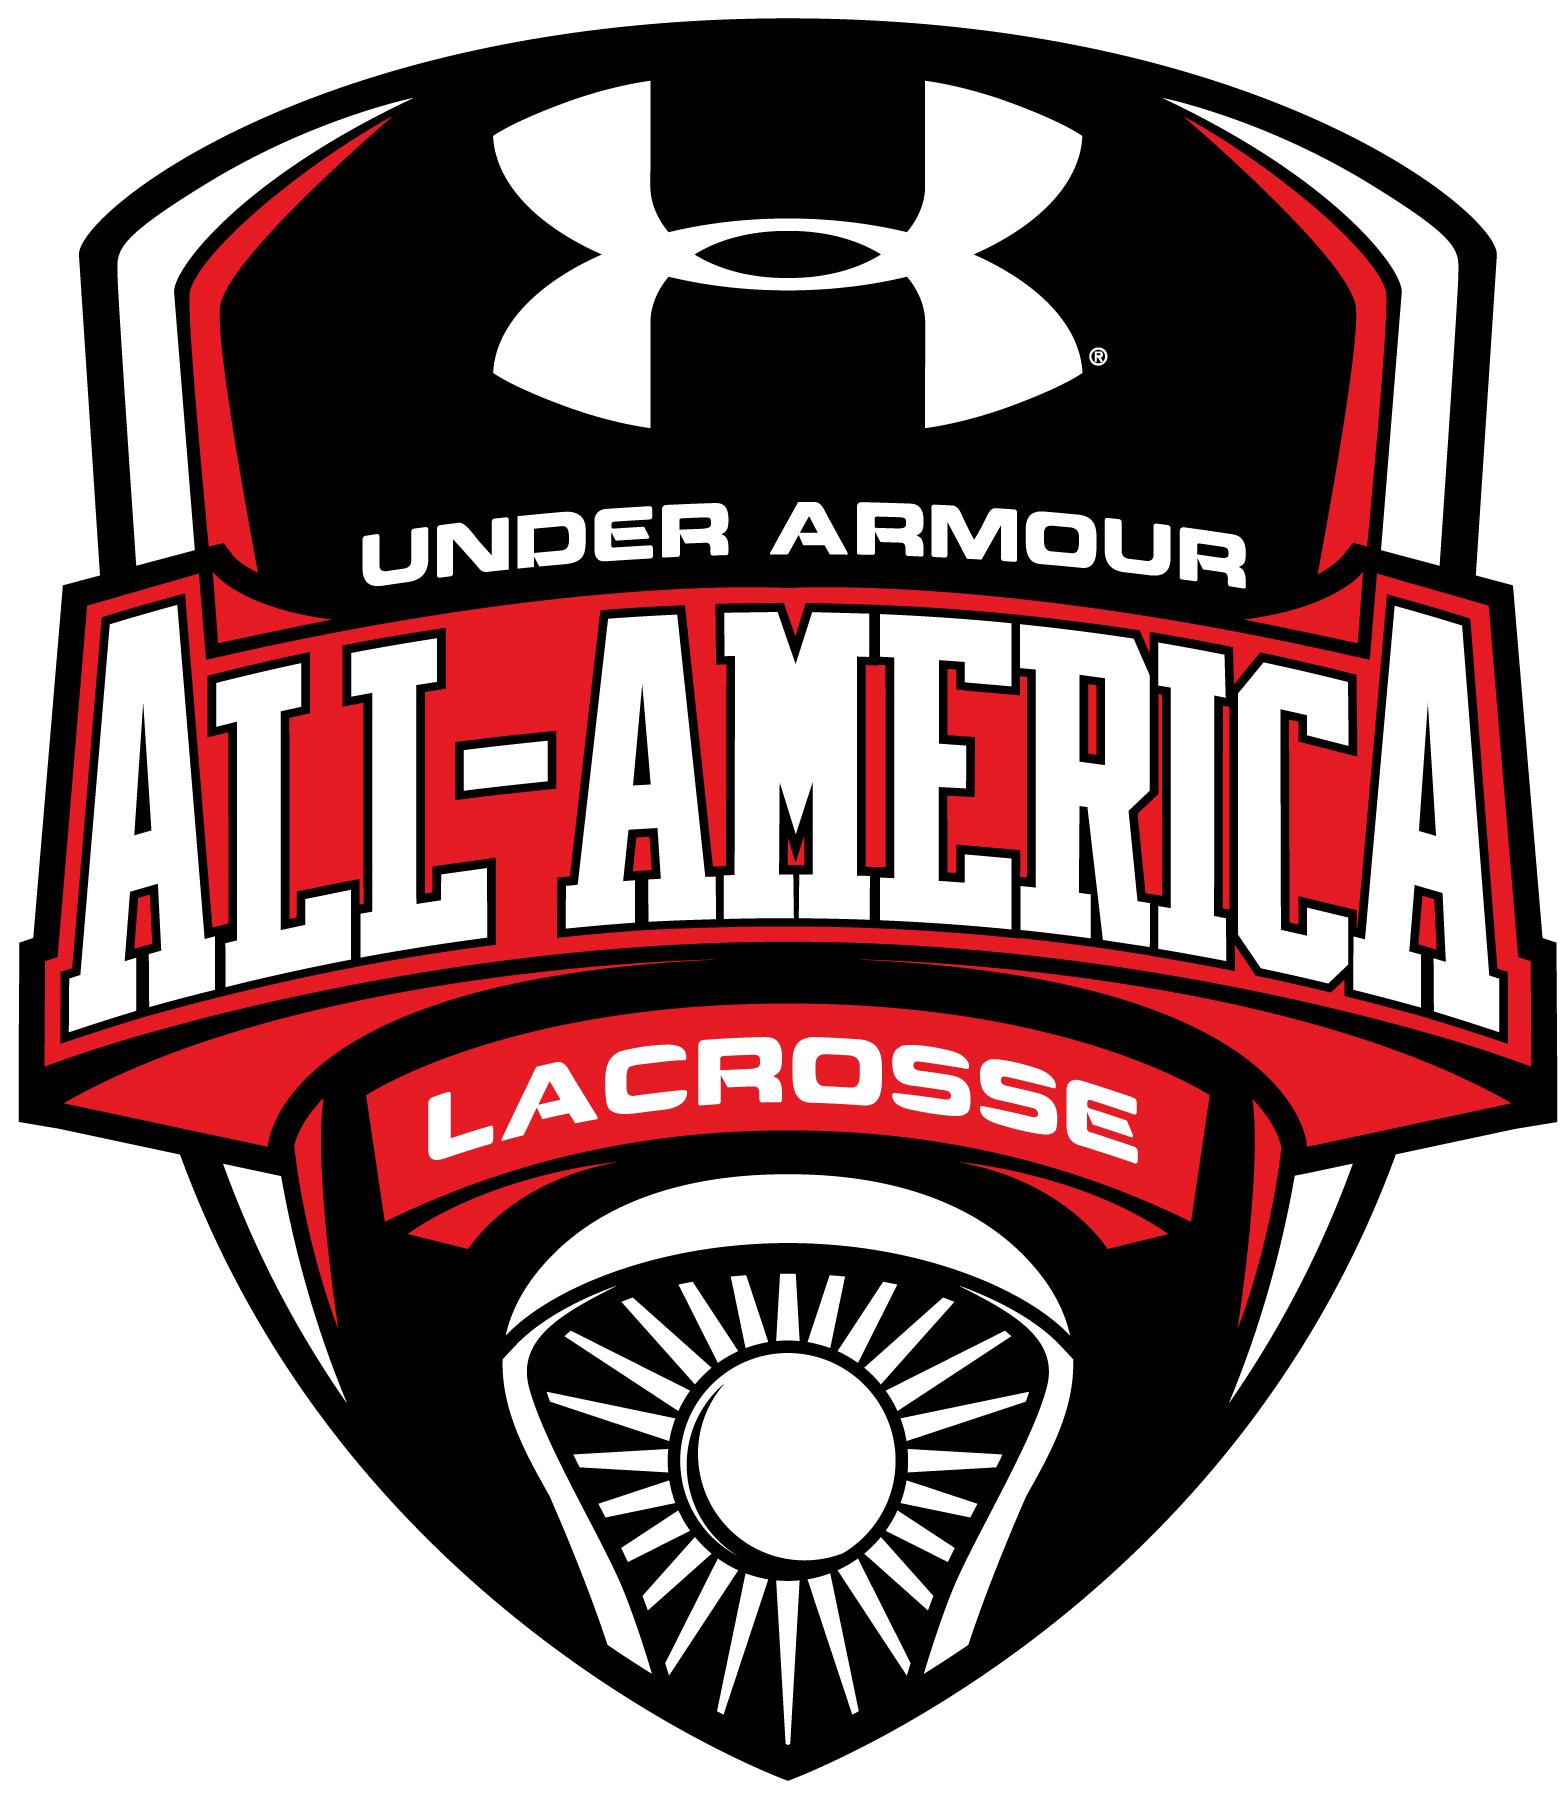 Under Armour Team Football Logo - 2011 History/Results - Under Armour All-America